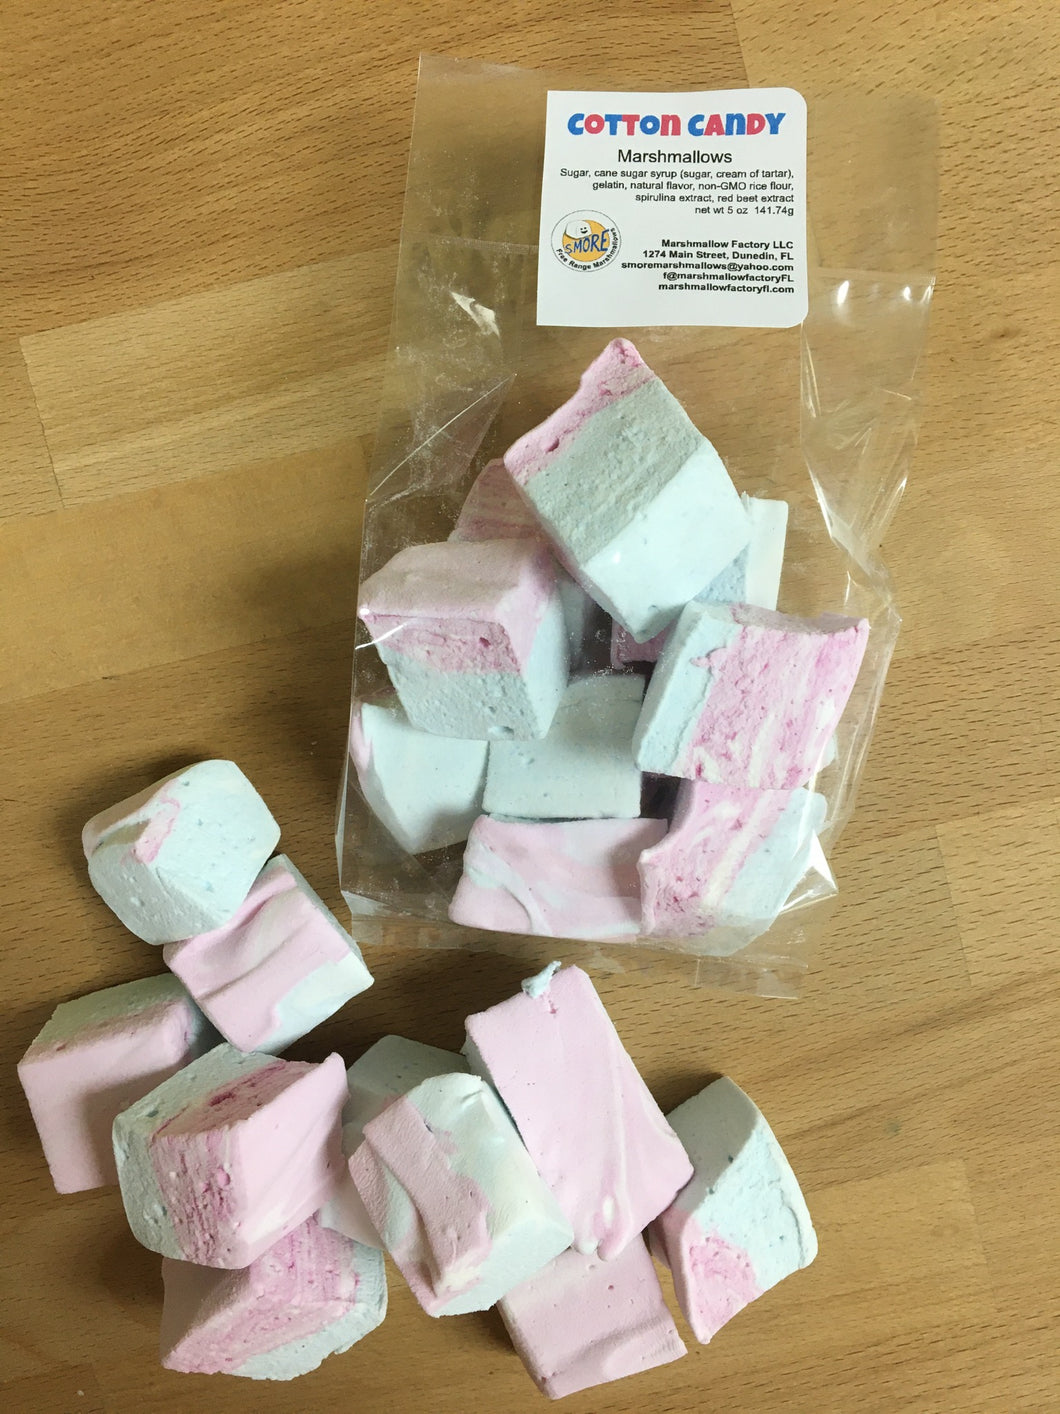 Cotton Candy - Marshmallow Flavor